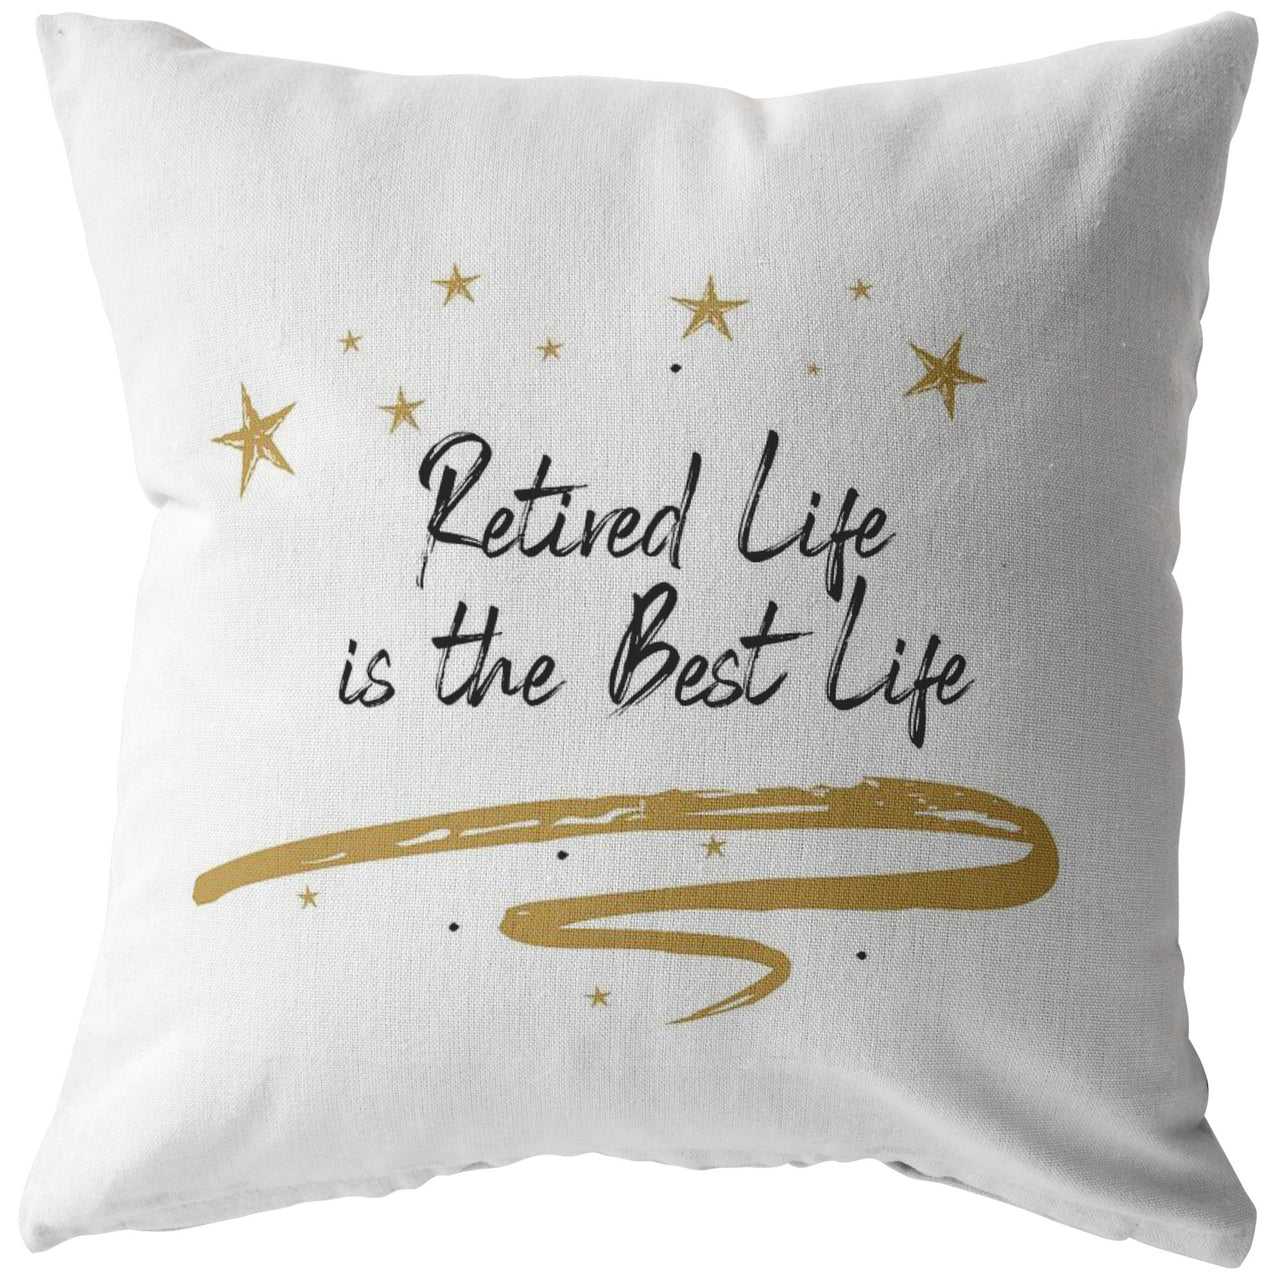 "Retired Life Is The Best Life" Pillow